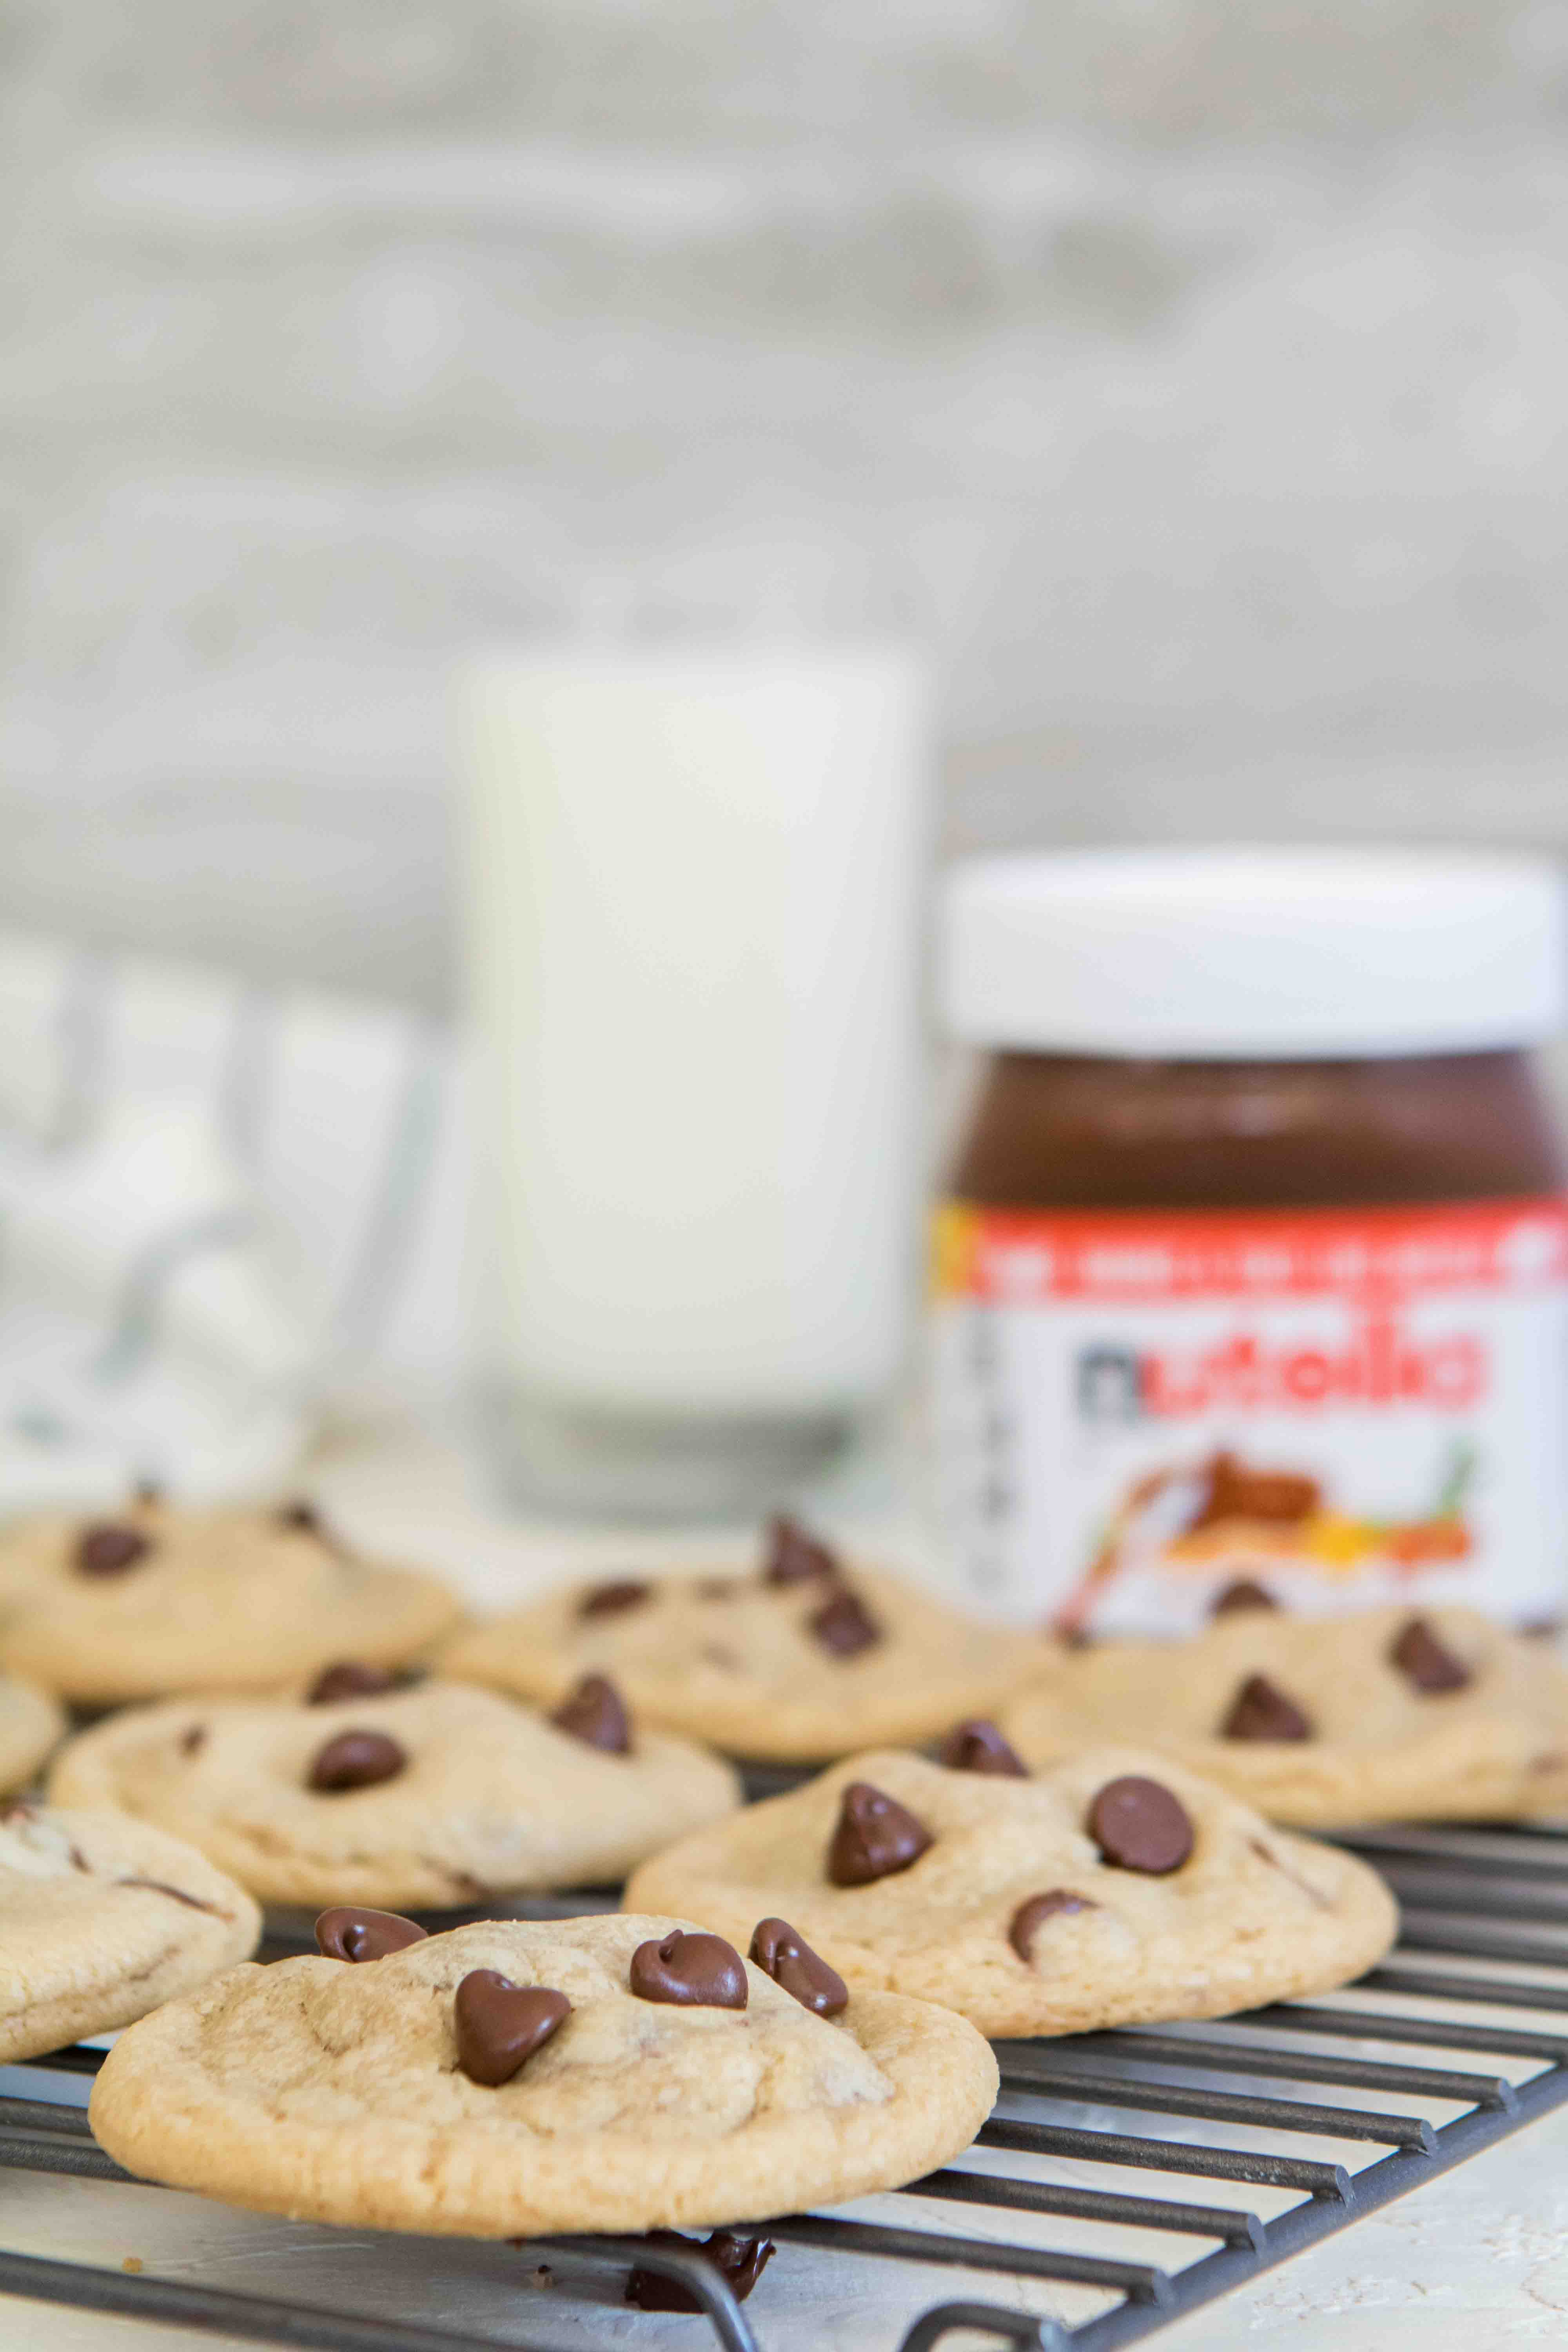 The easiest Nutella stuffed chocolate chip cookie recipe